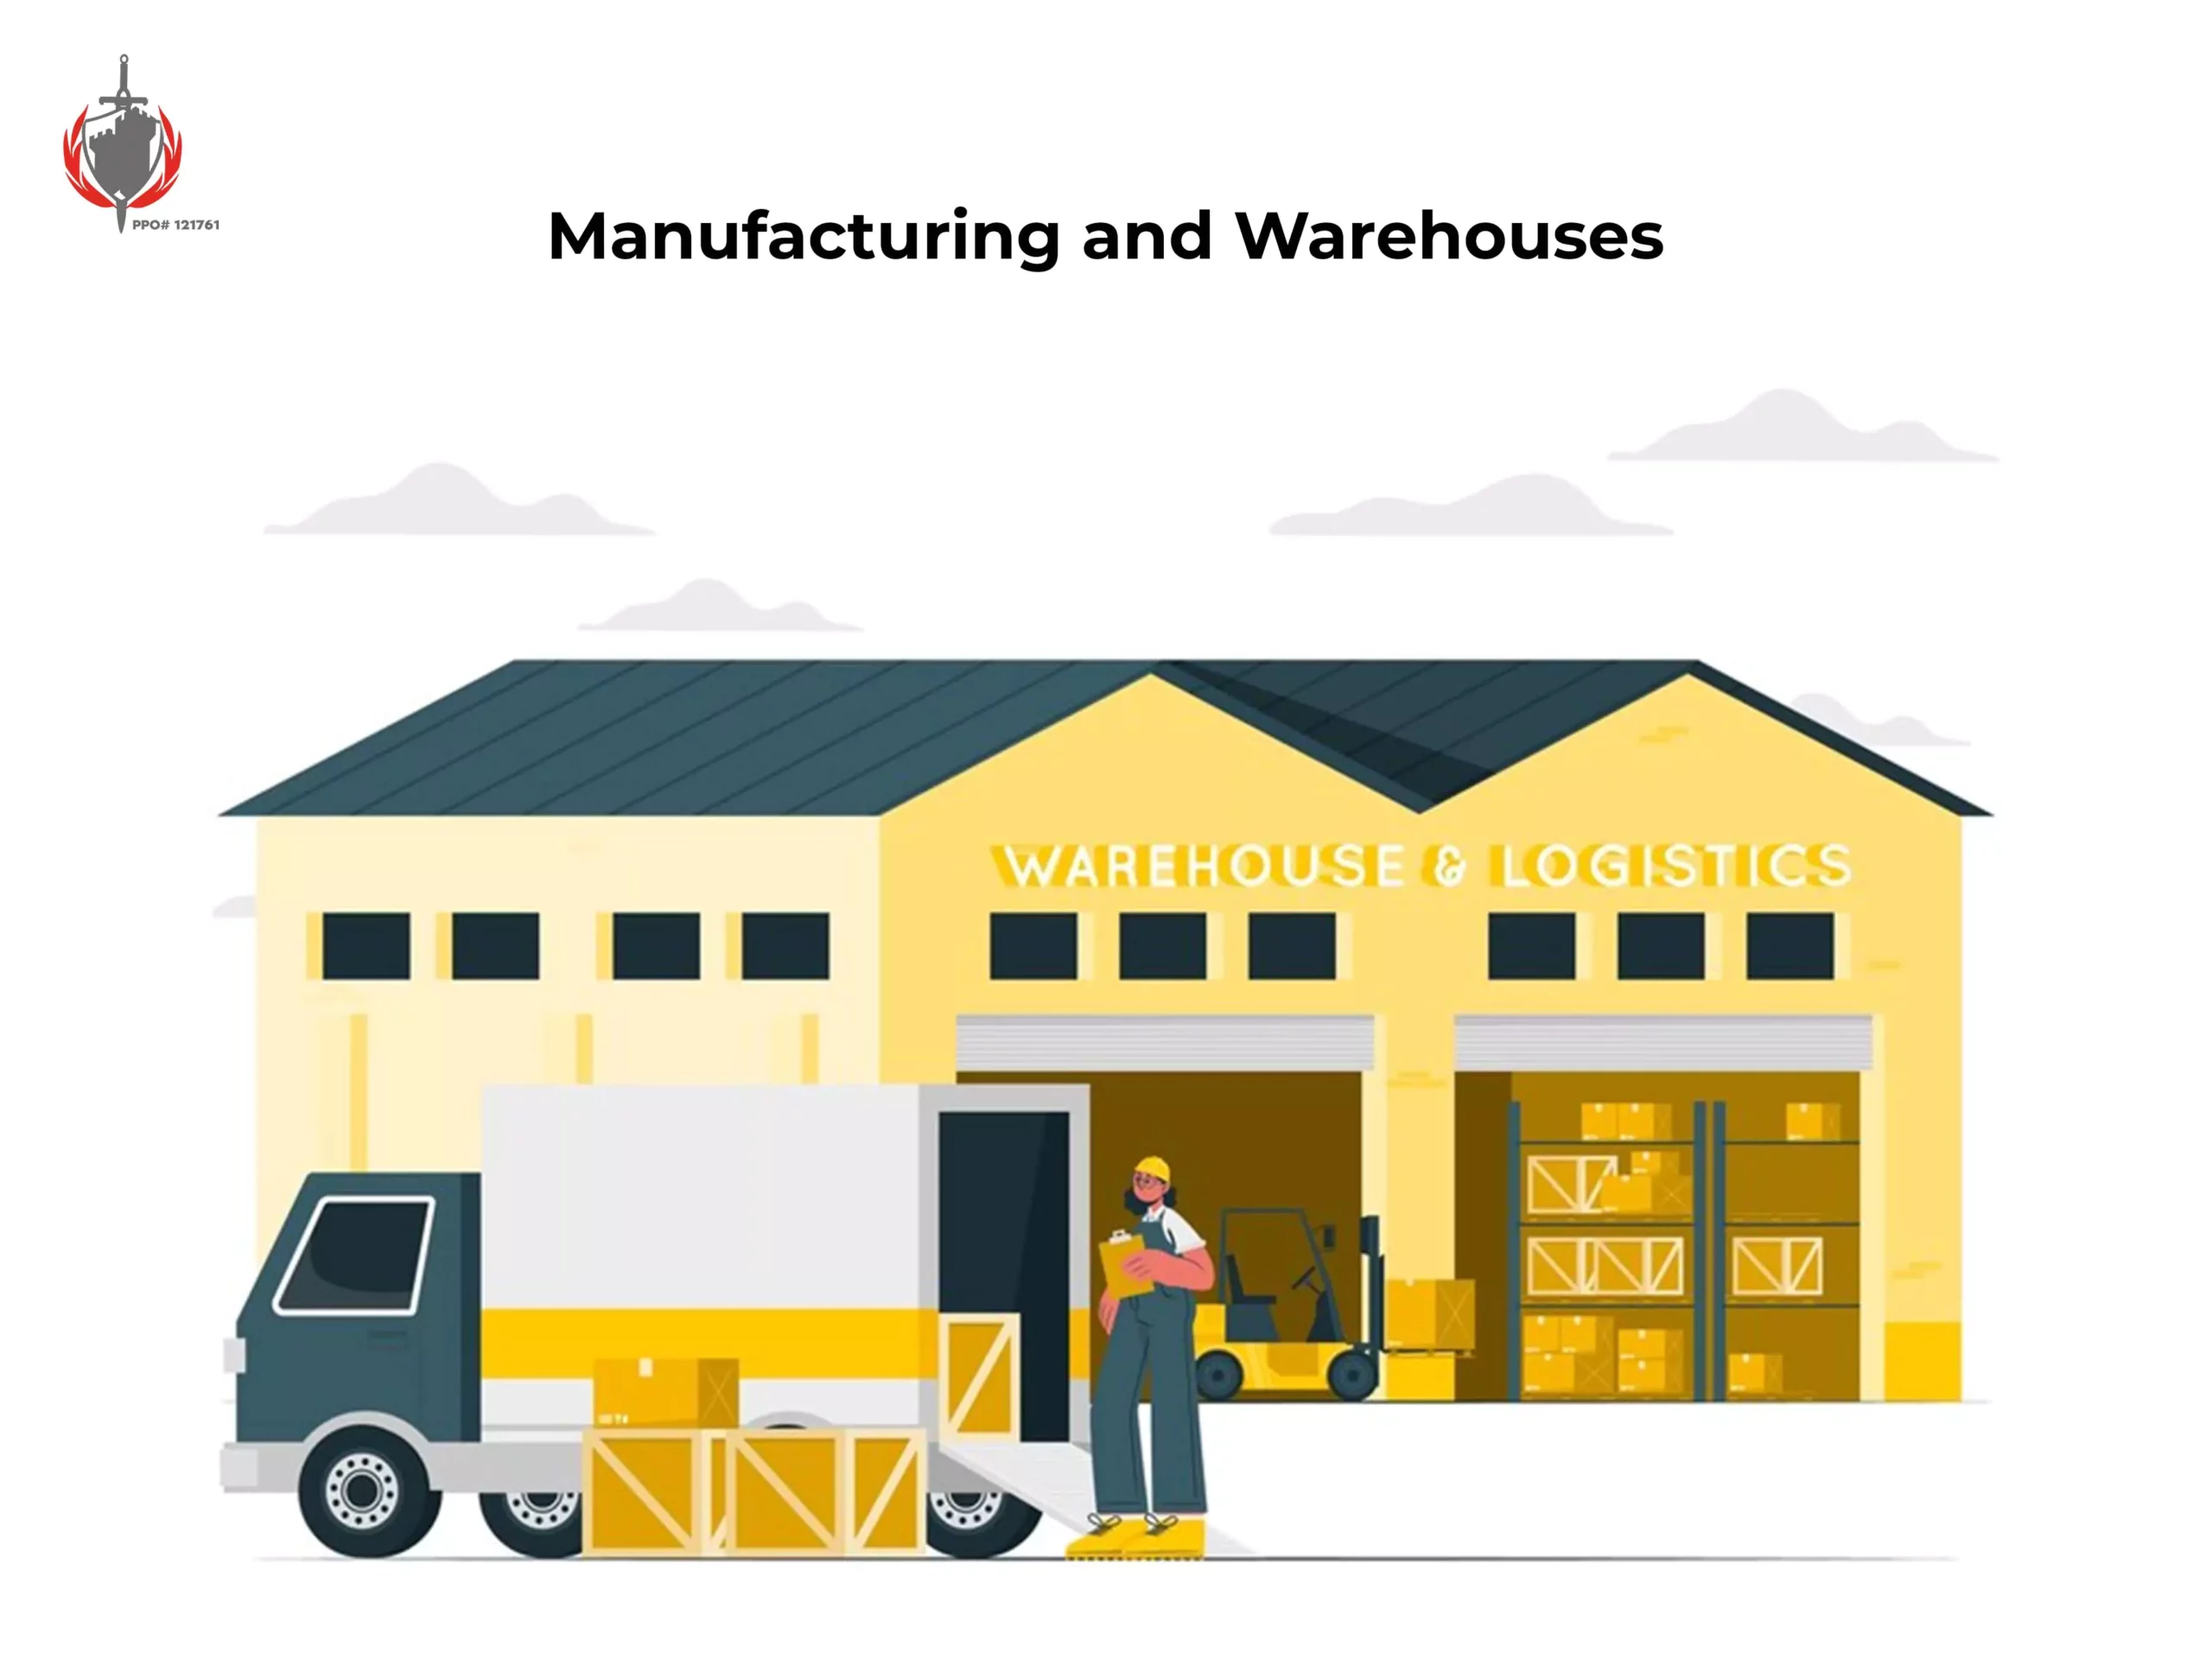 Manufacturing and Warehouses